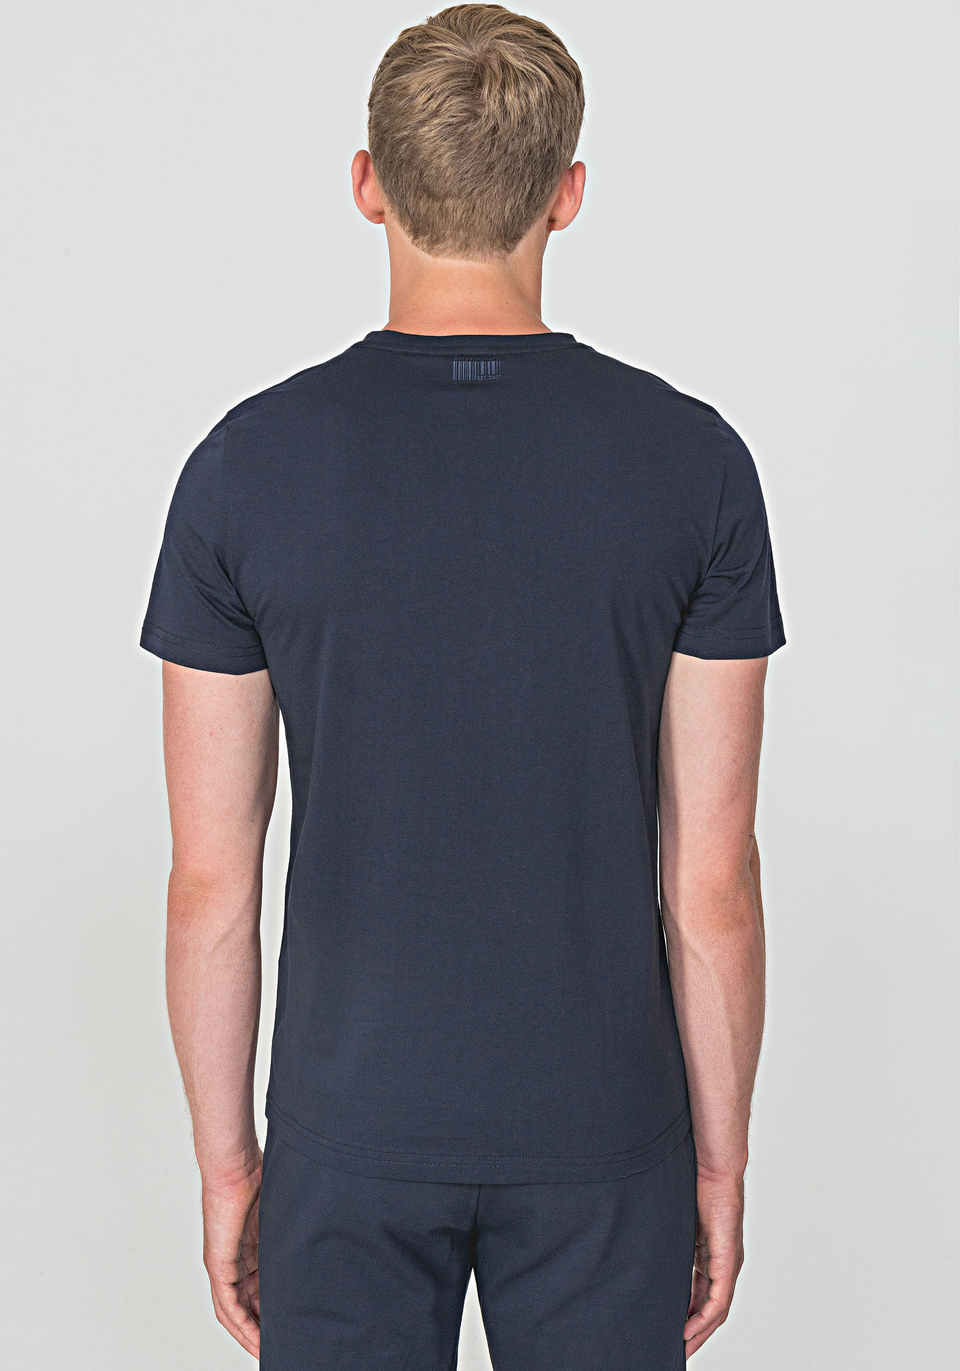 REGULAR-FIT T-SHIRT IN 100% SOFT COTTON WITH VERTICAL PRINT - Antony Morato Online Shop